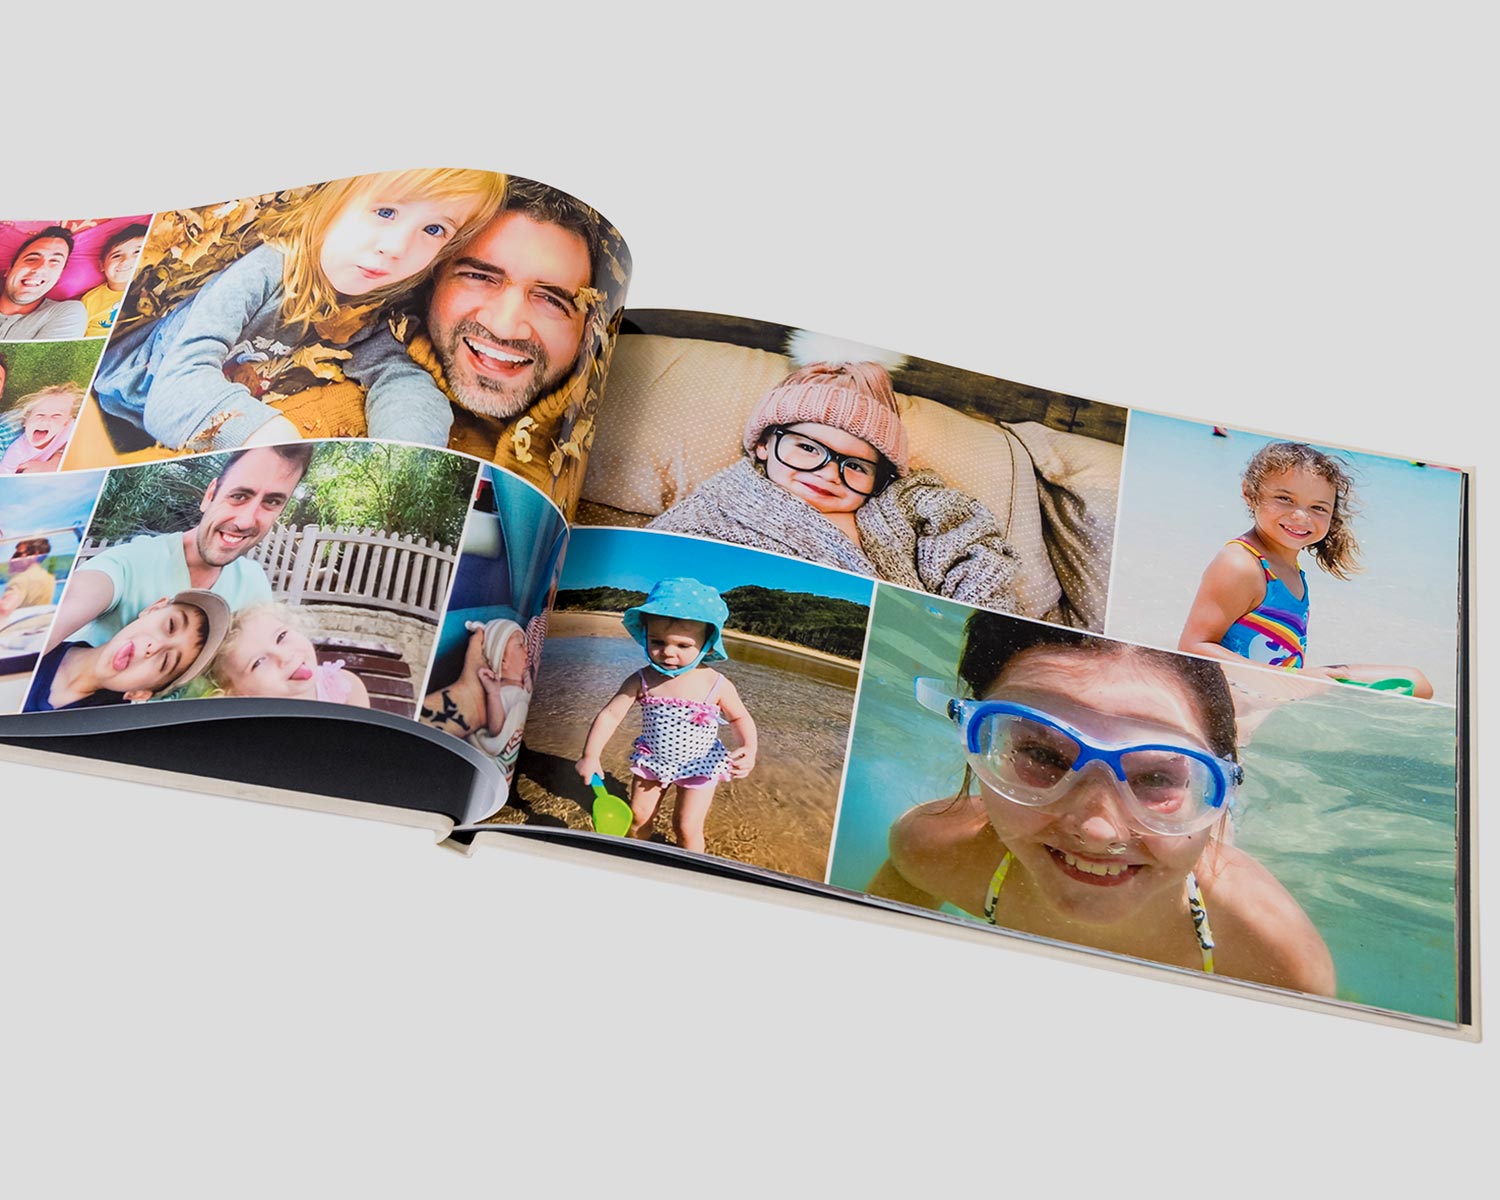 Opened personalised photo book with family photos on display